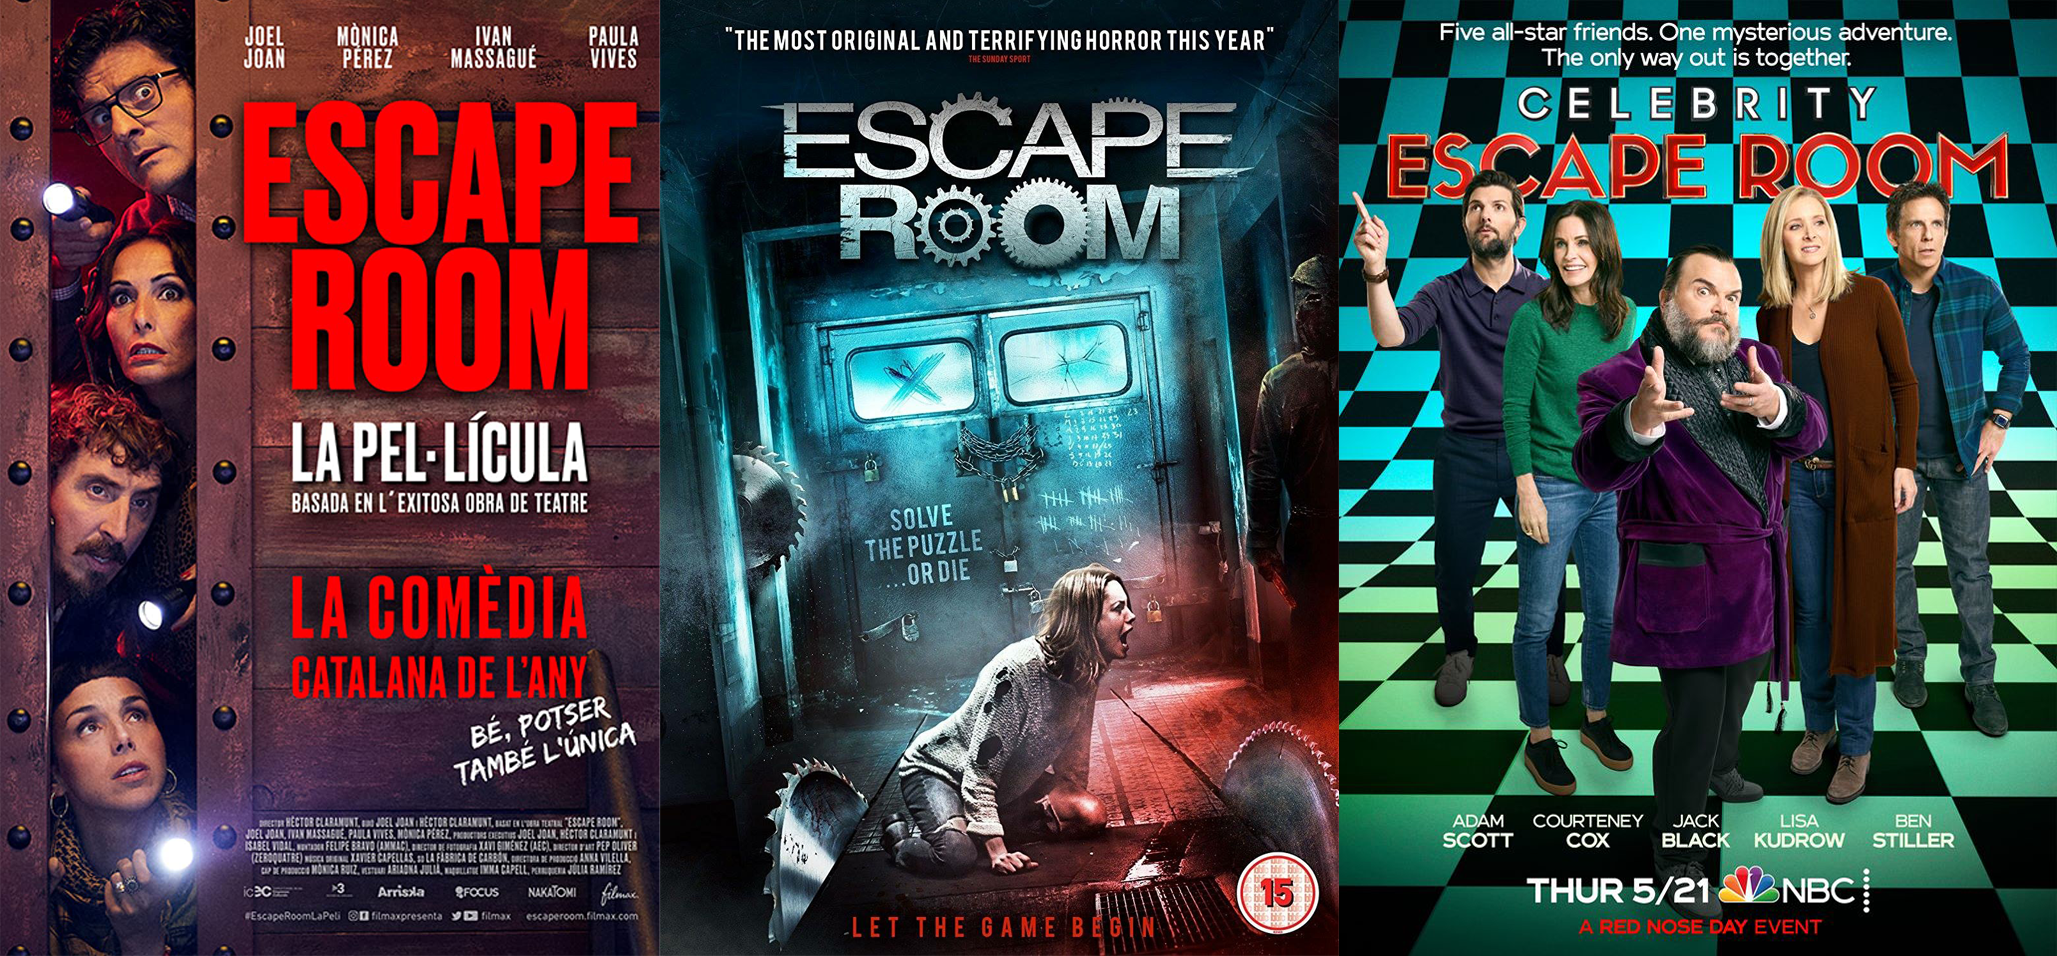 These cool escape rooms are way better than the new movie